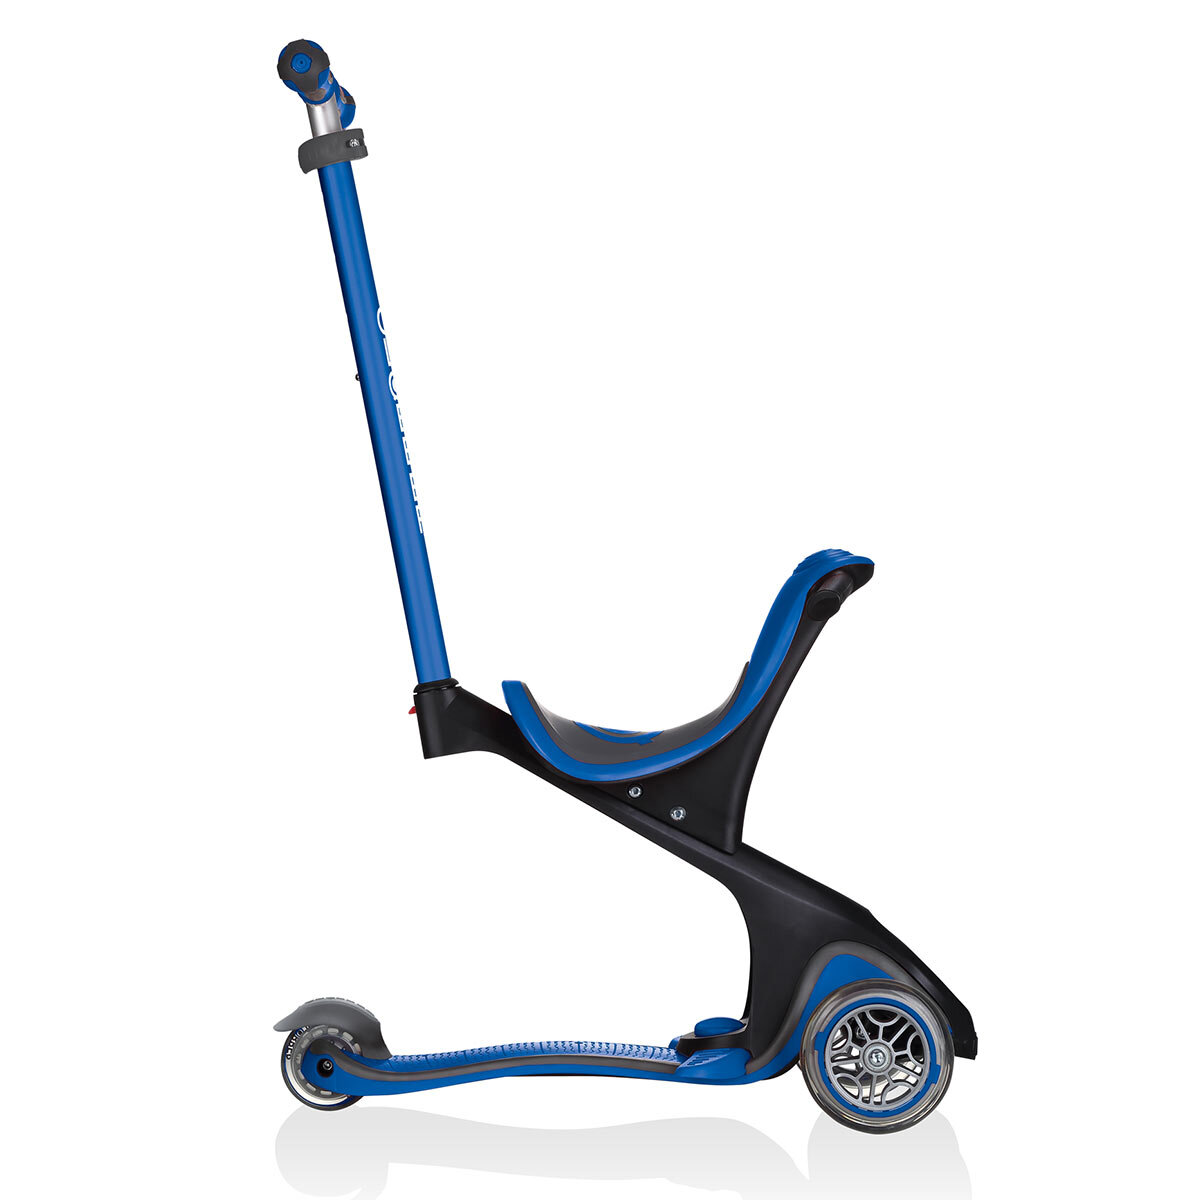 Buy Globber Go Up Comfort Scooter in Navy Step 1 Image at Costco.co.uk